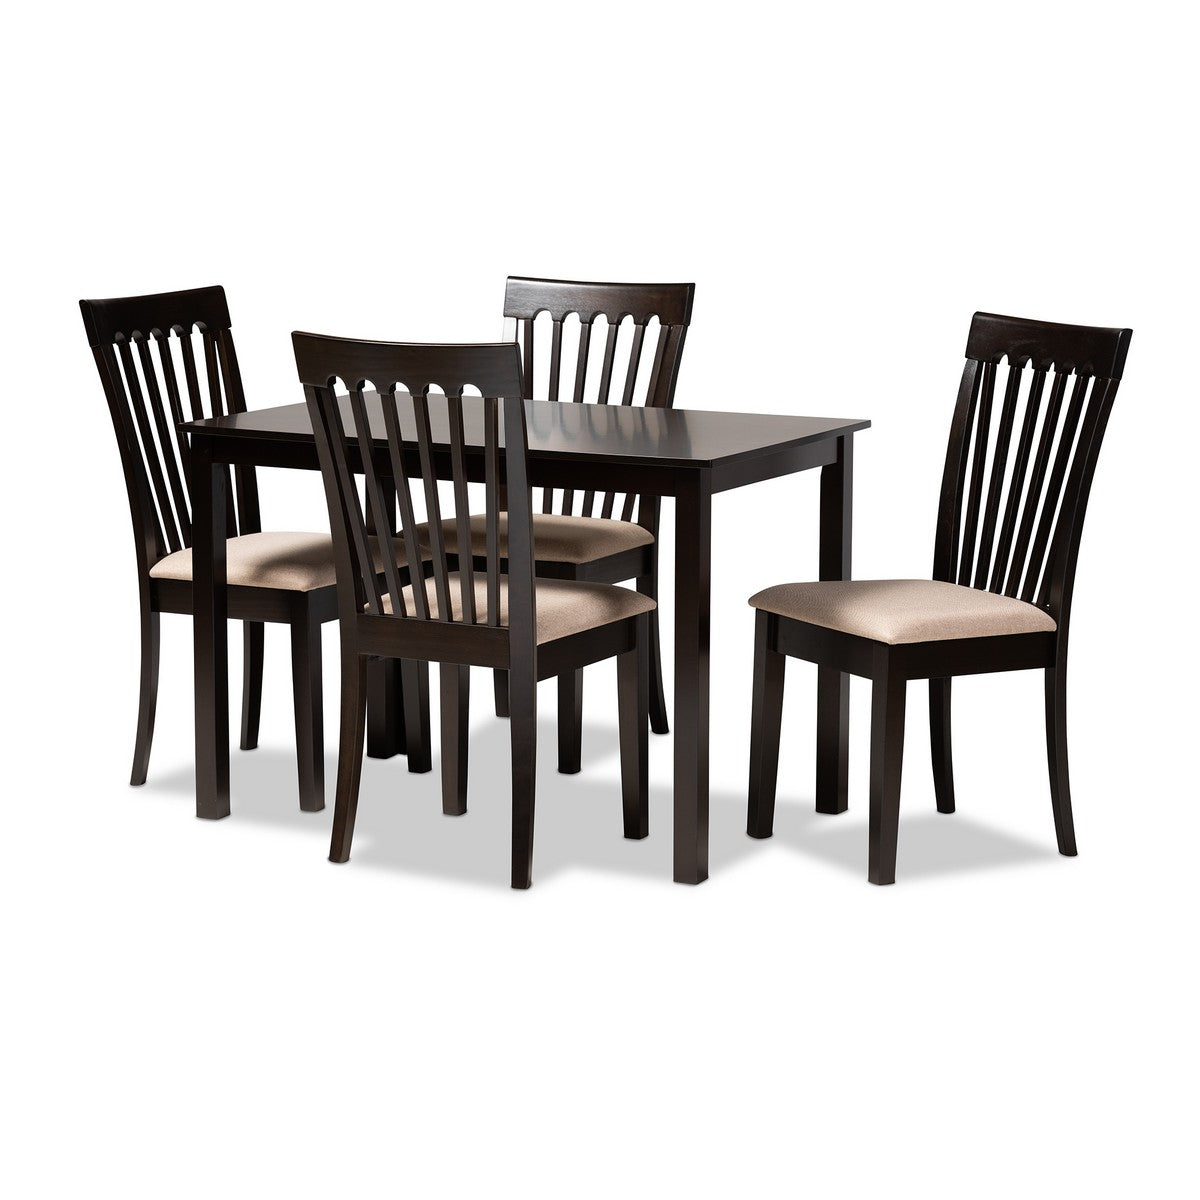 Baxton Studio Minette Modern and Contemporary Sand Fabric Upholstered Espresso Brown Finished Wood 5-Piece Dining Set Baxton Studio-Dining Sets-Minimal And Modern - 1